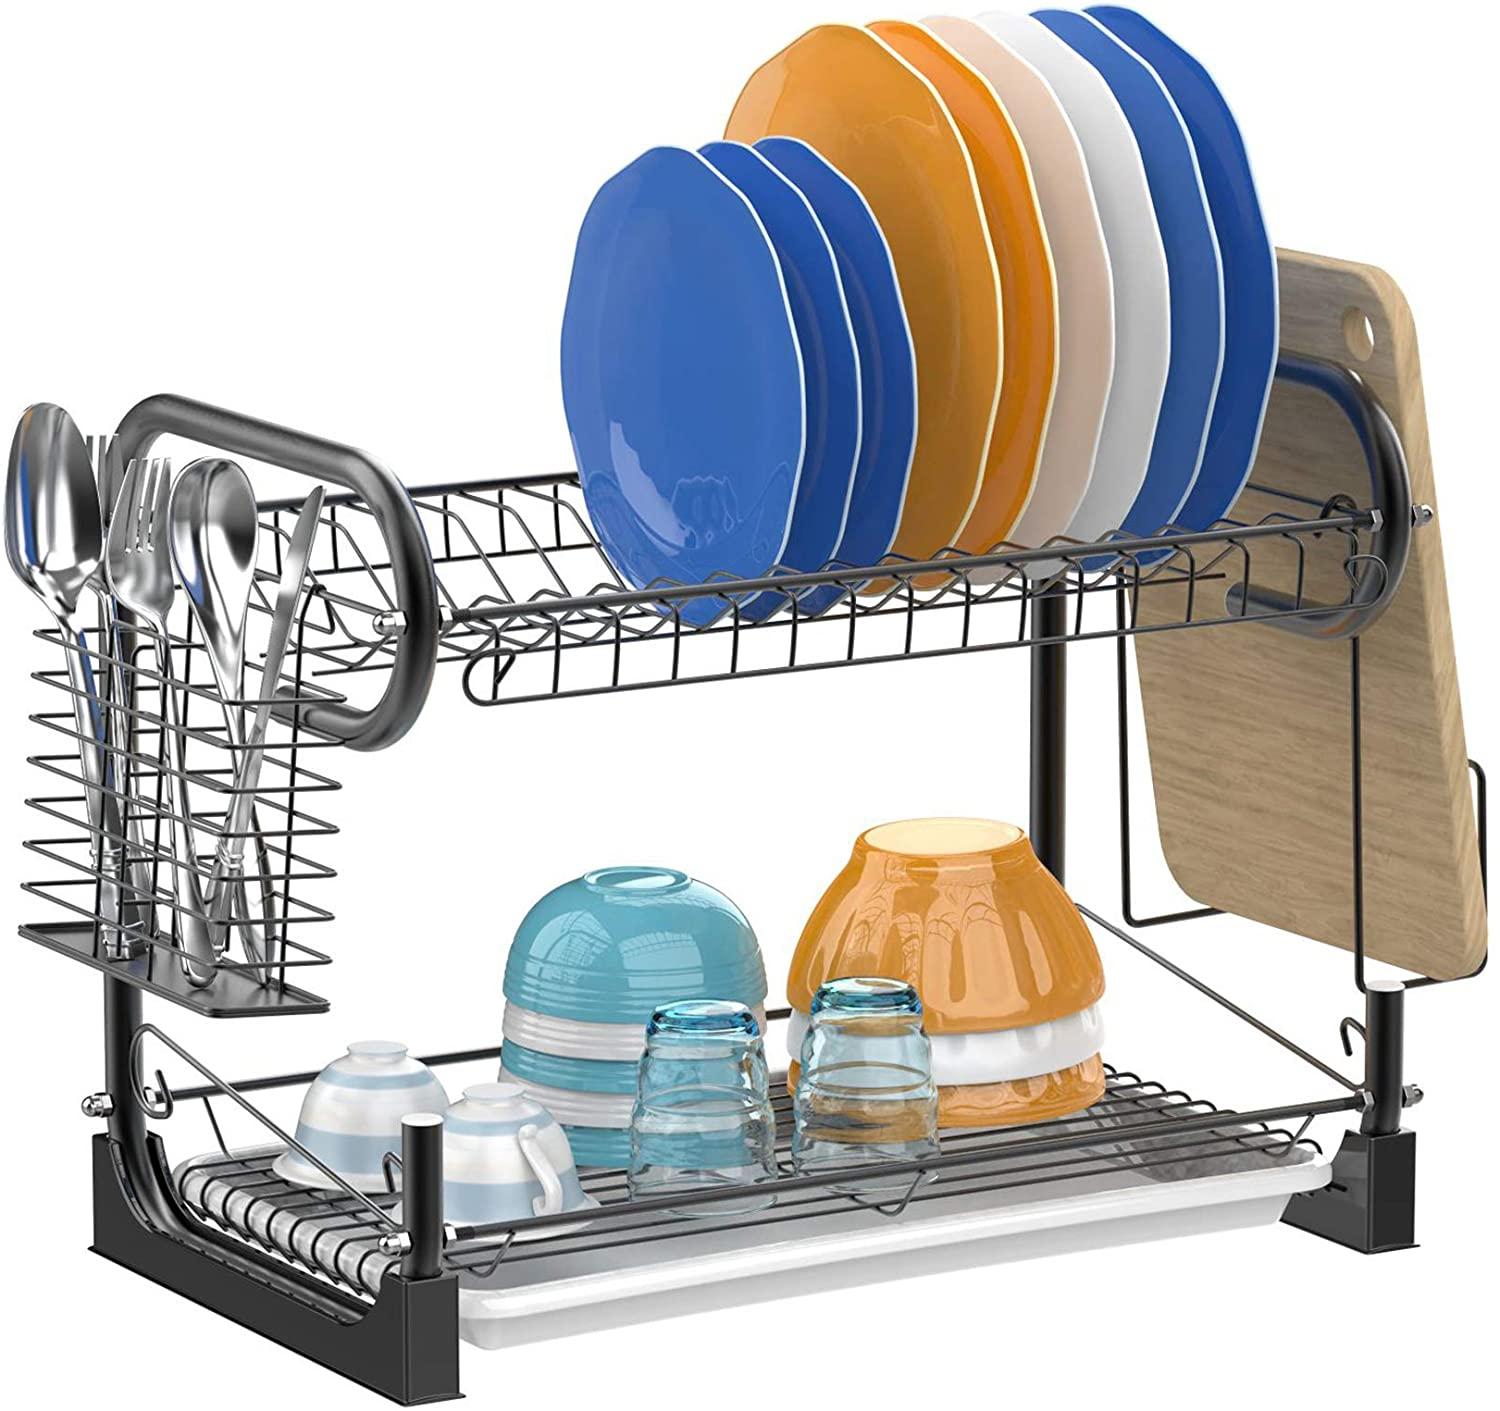 2 Tier Dish Drying Rack for $14.99 Shipped